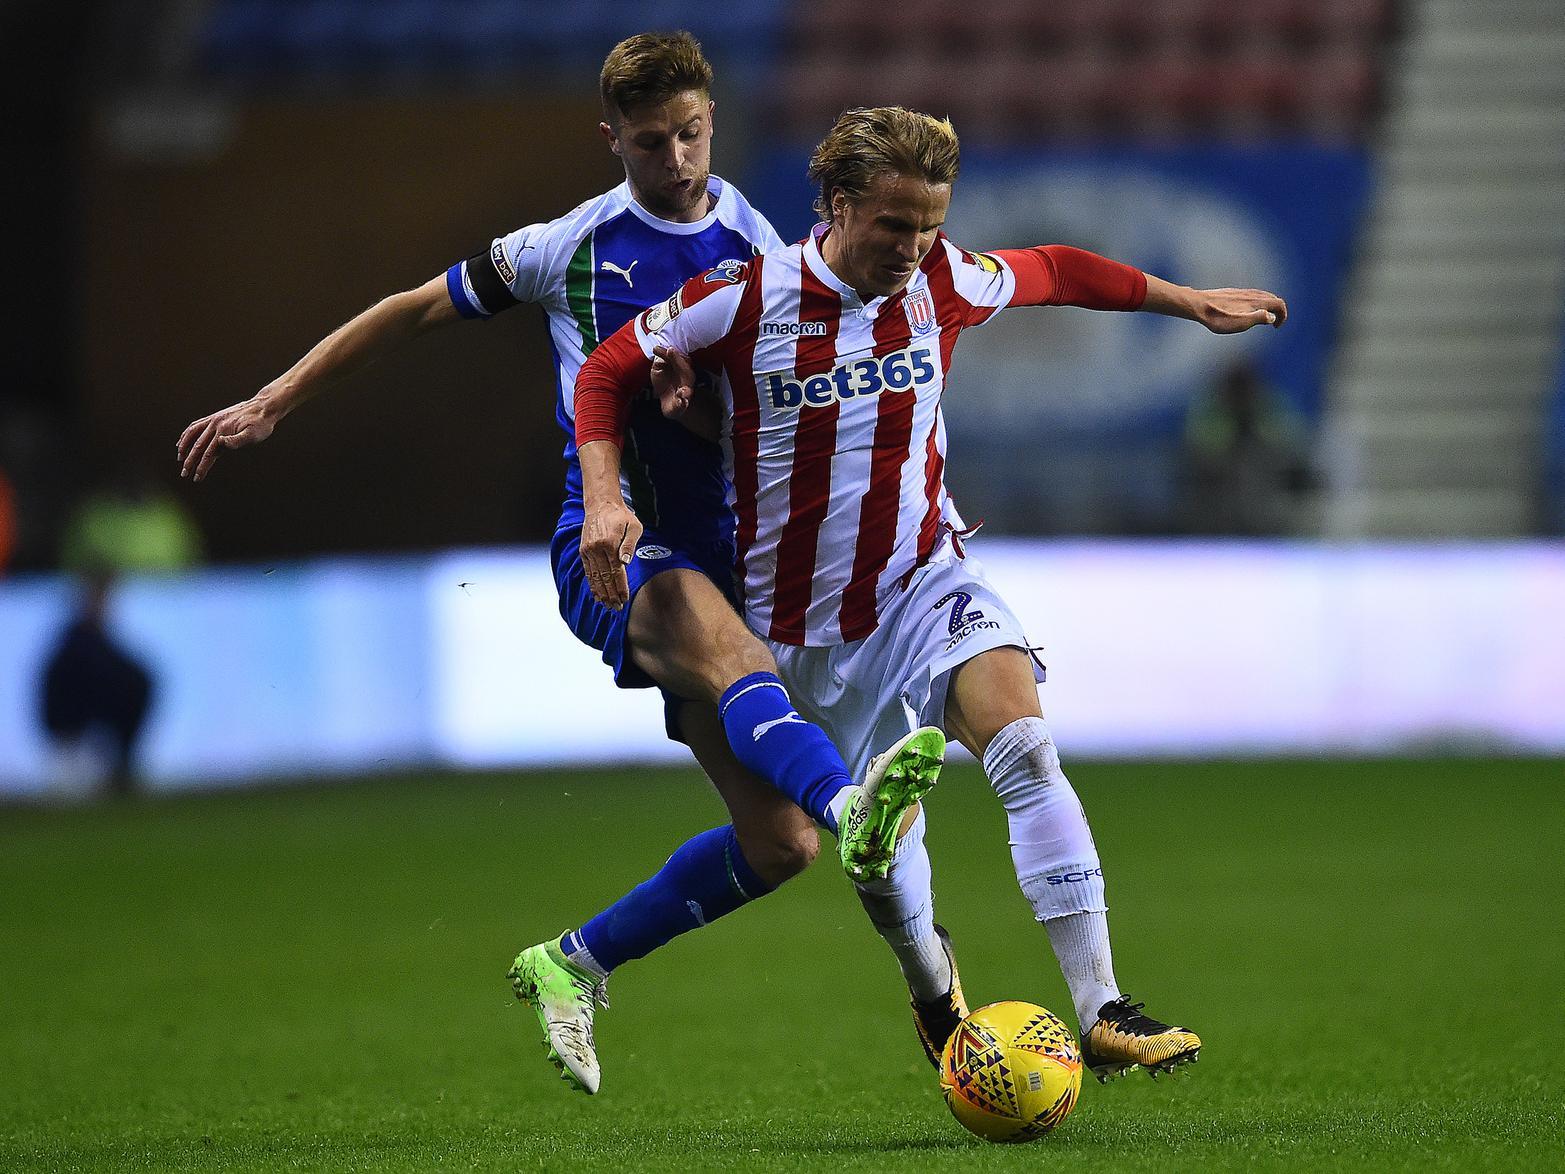 Celtic look set to sign right-back loanee Moritz Bauer on a permanent deal from his parent club Stoke City, with their new manager Michael Collins said to have deemed the player surplus to requirements. (Daily Record)